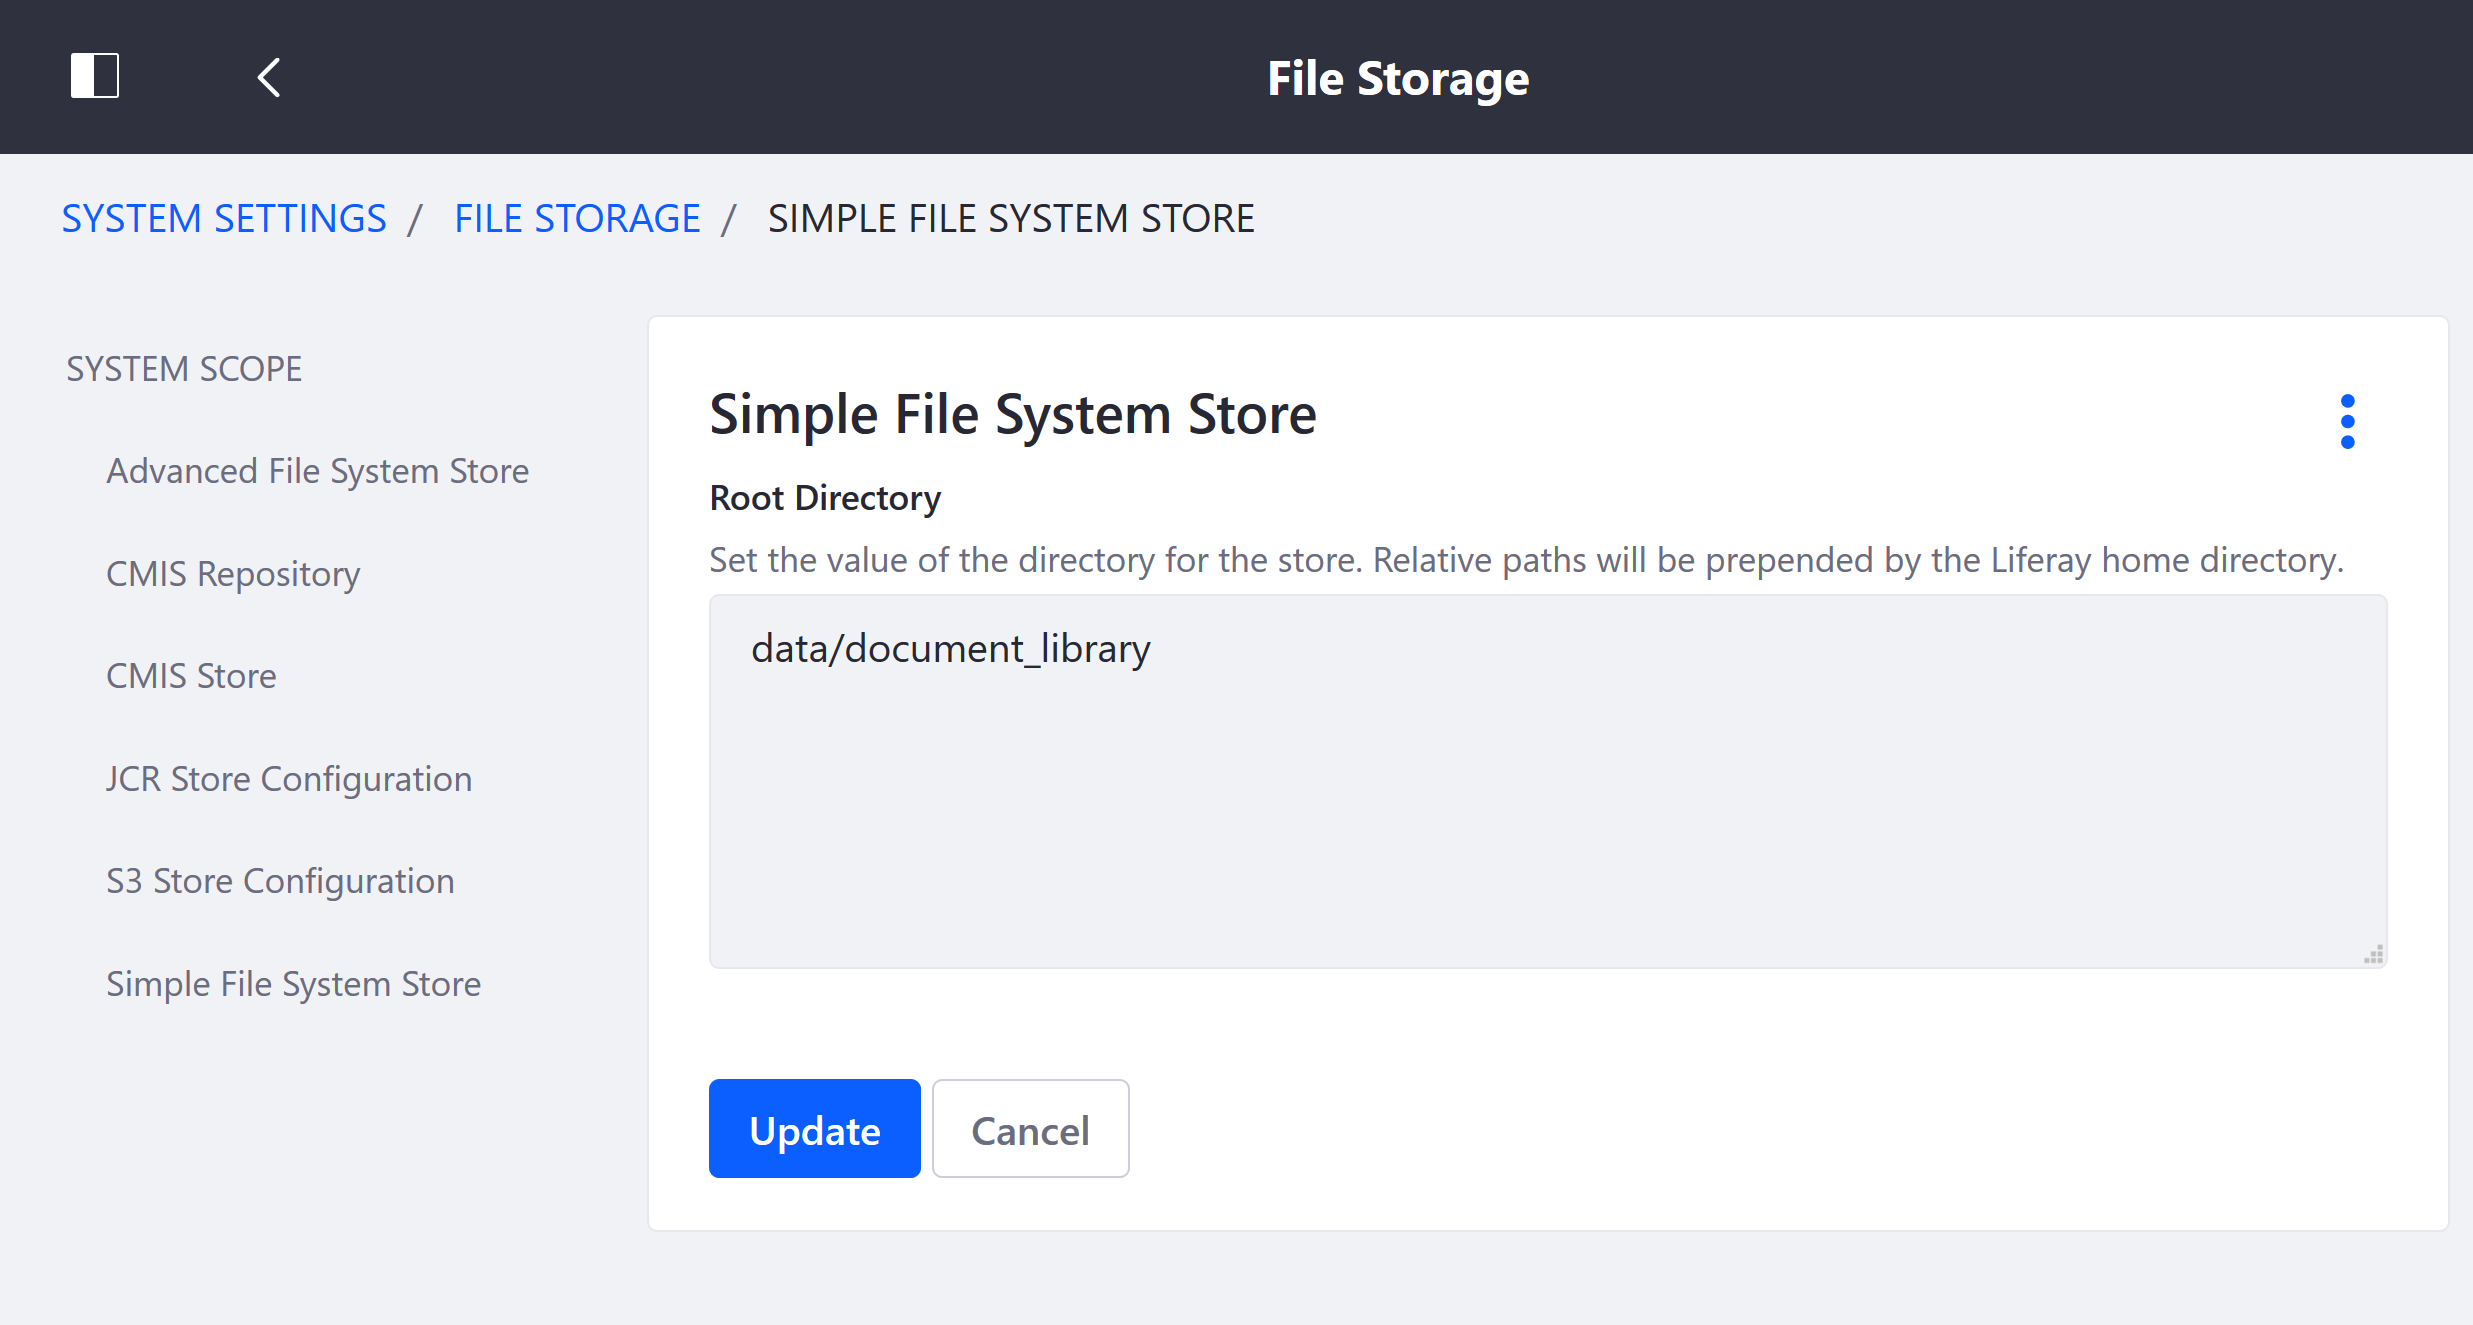 Figure 1: The File Storage page in System Settings lets you configure document repository storage.